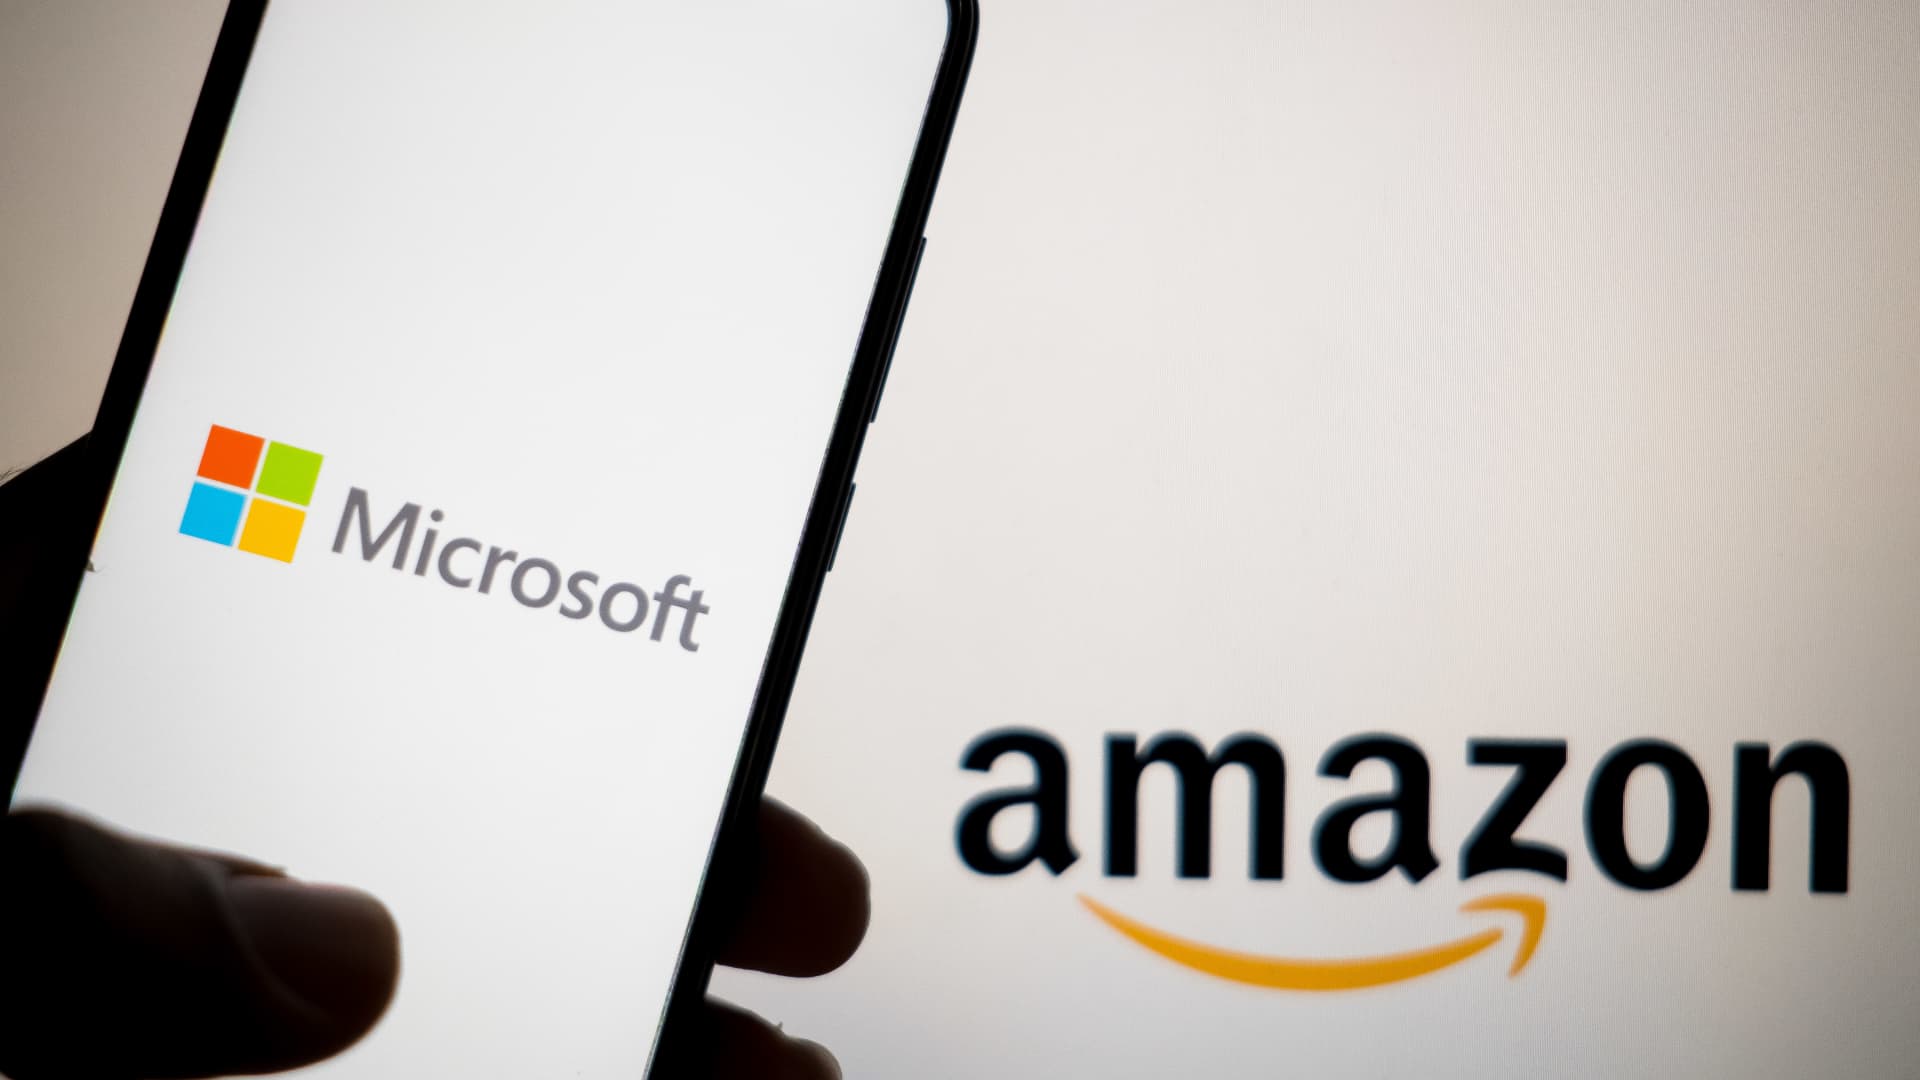 Microsoft and Amazon to invest $5.6 billion into France